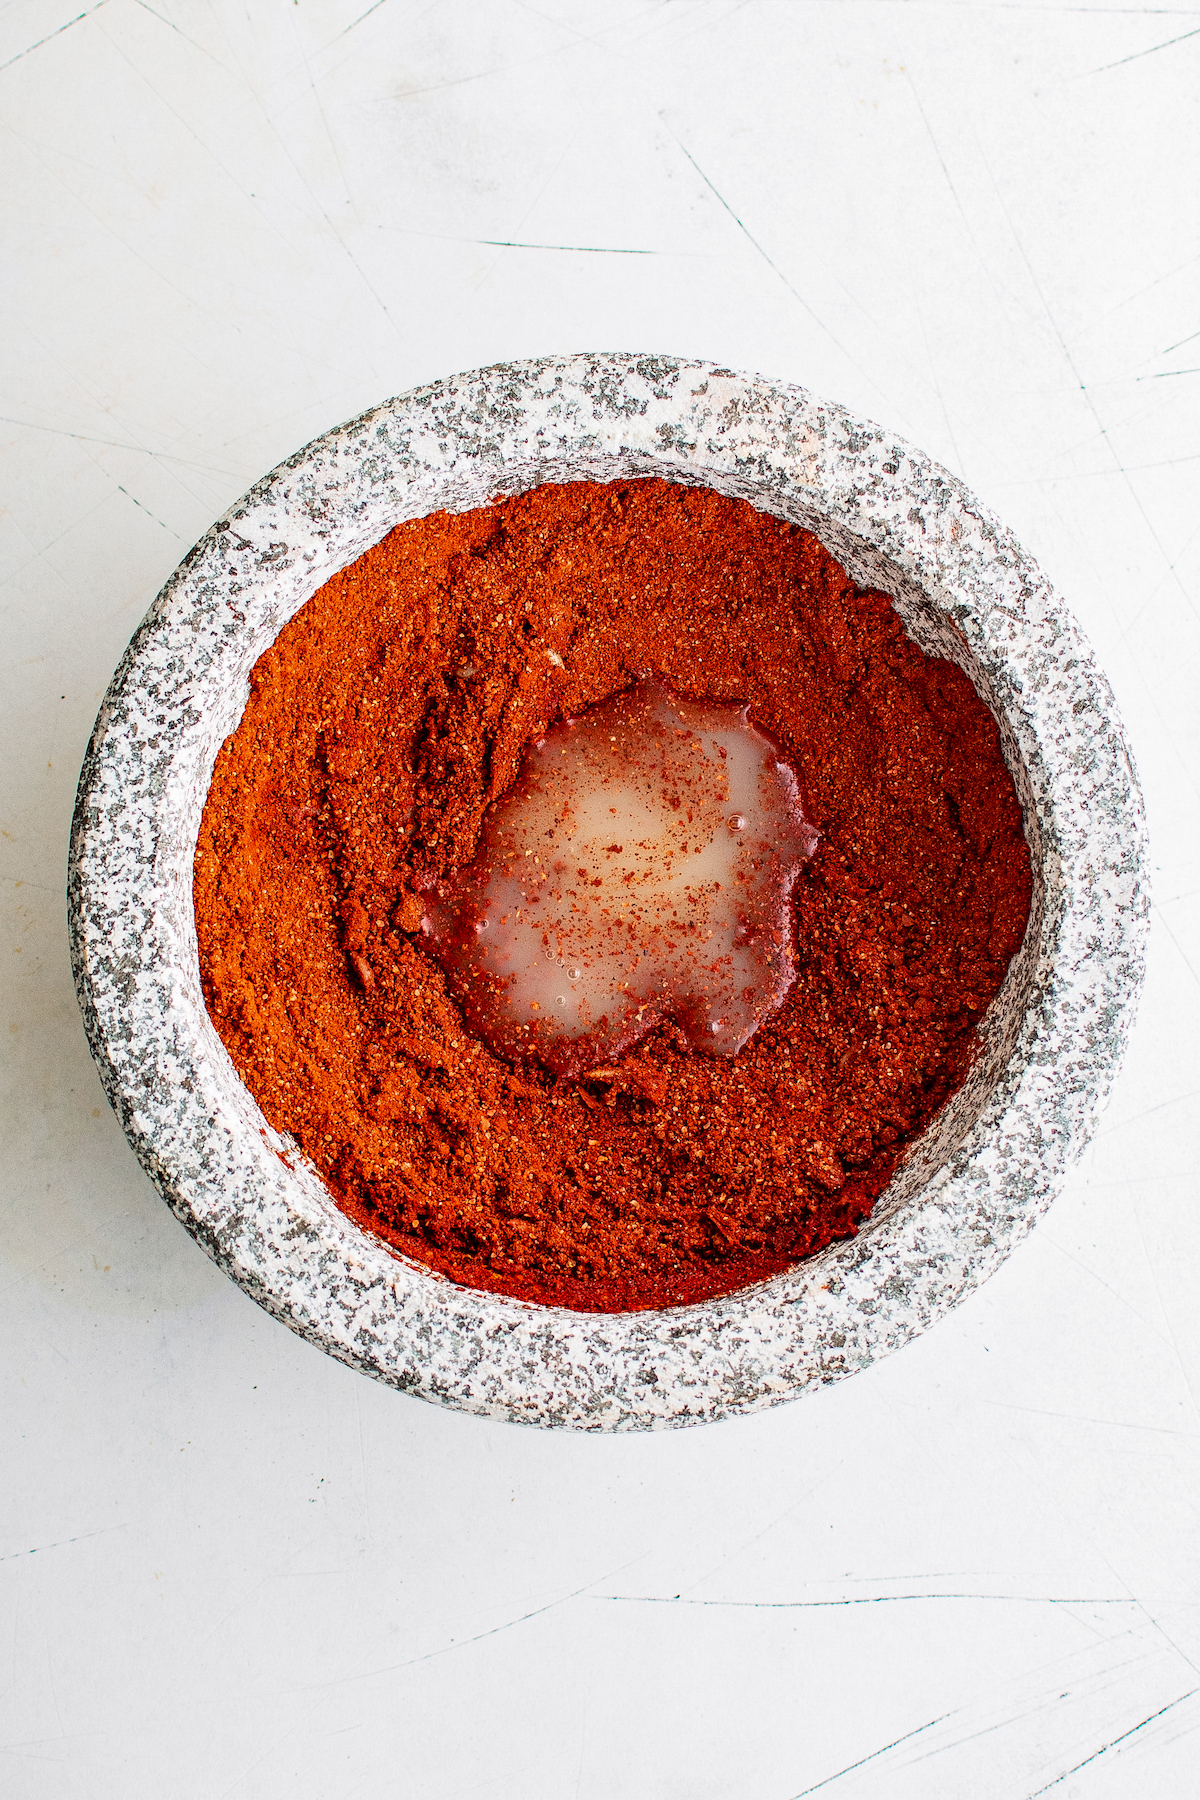 dried spices in a mortar in pestle with a small amount of orange juice